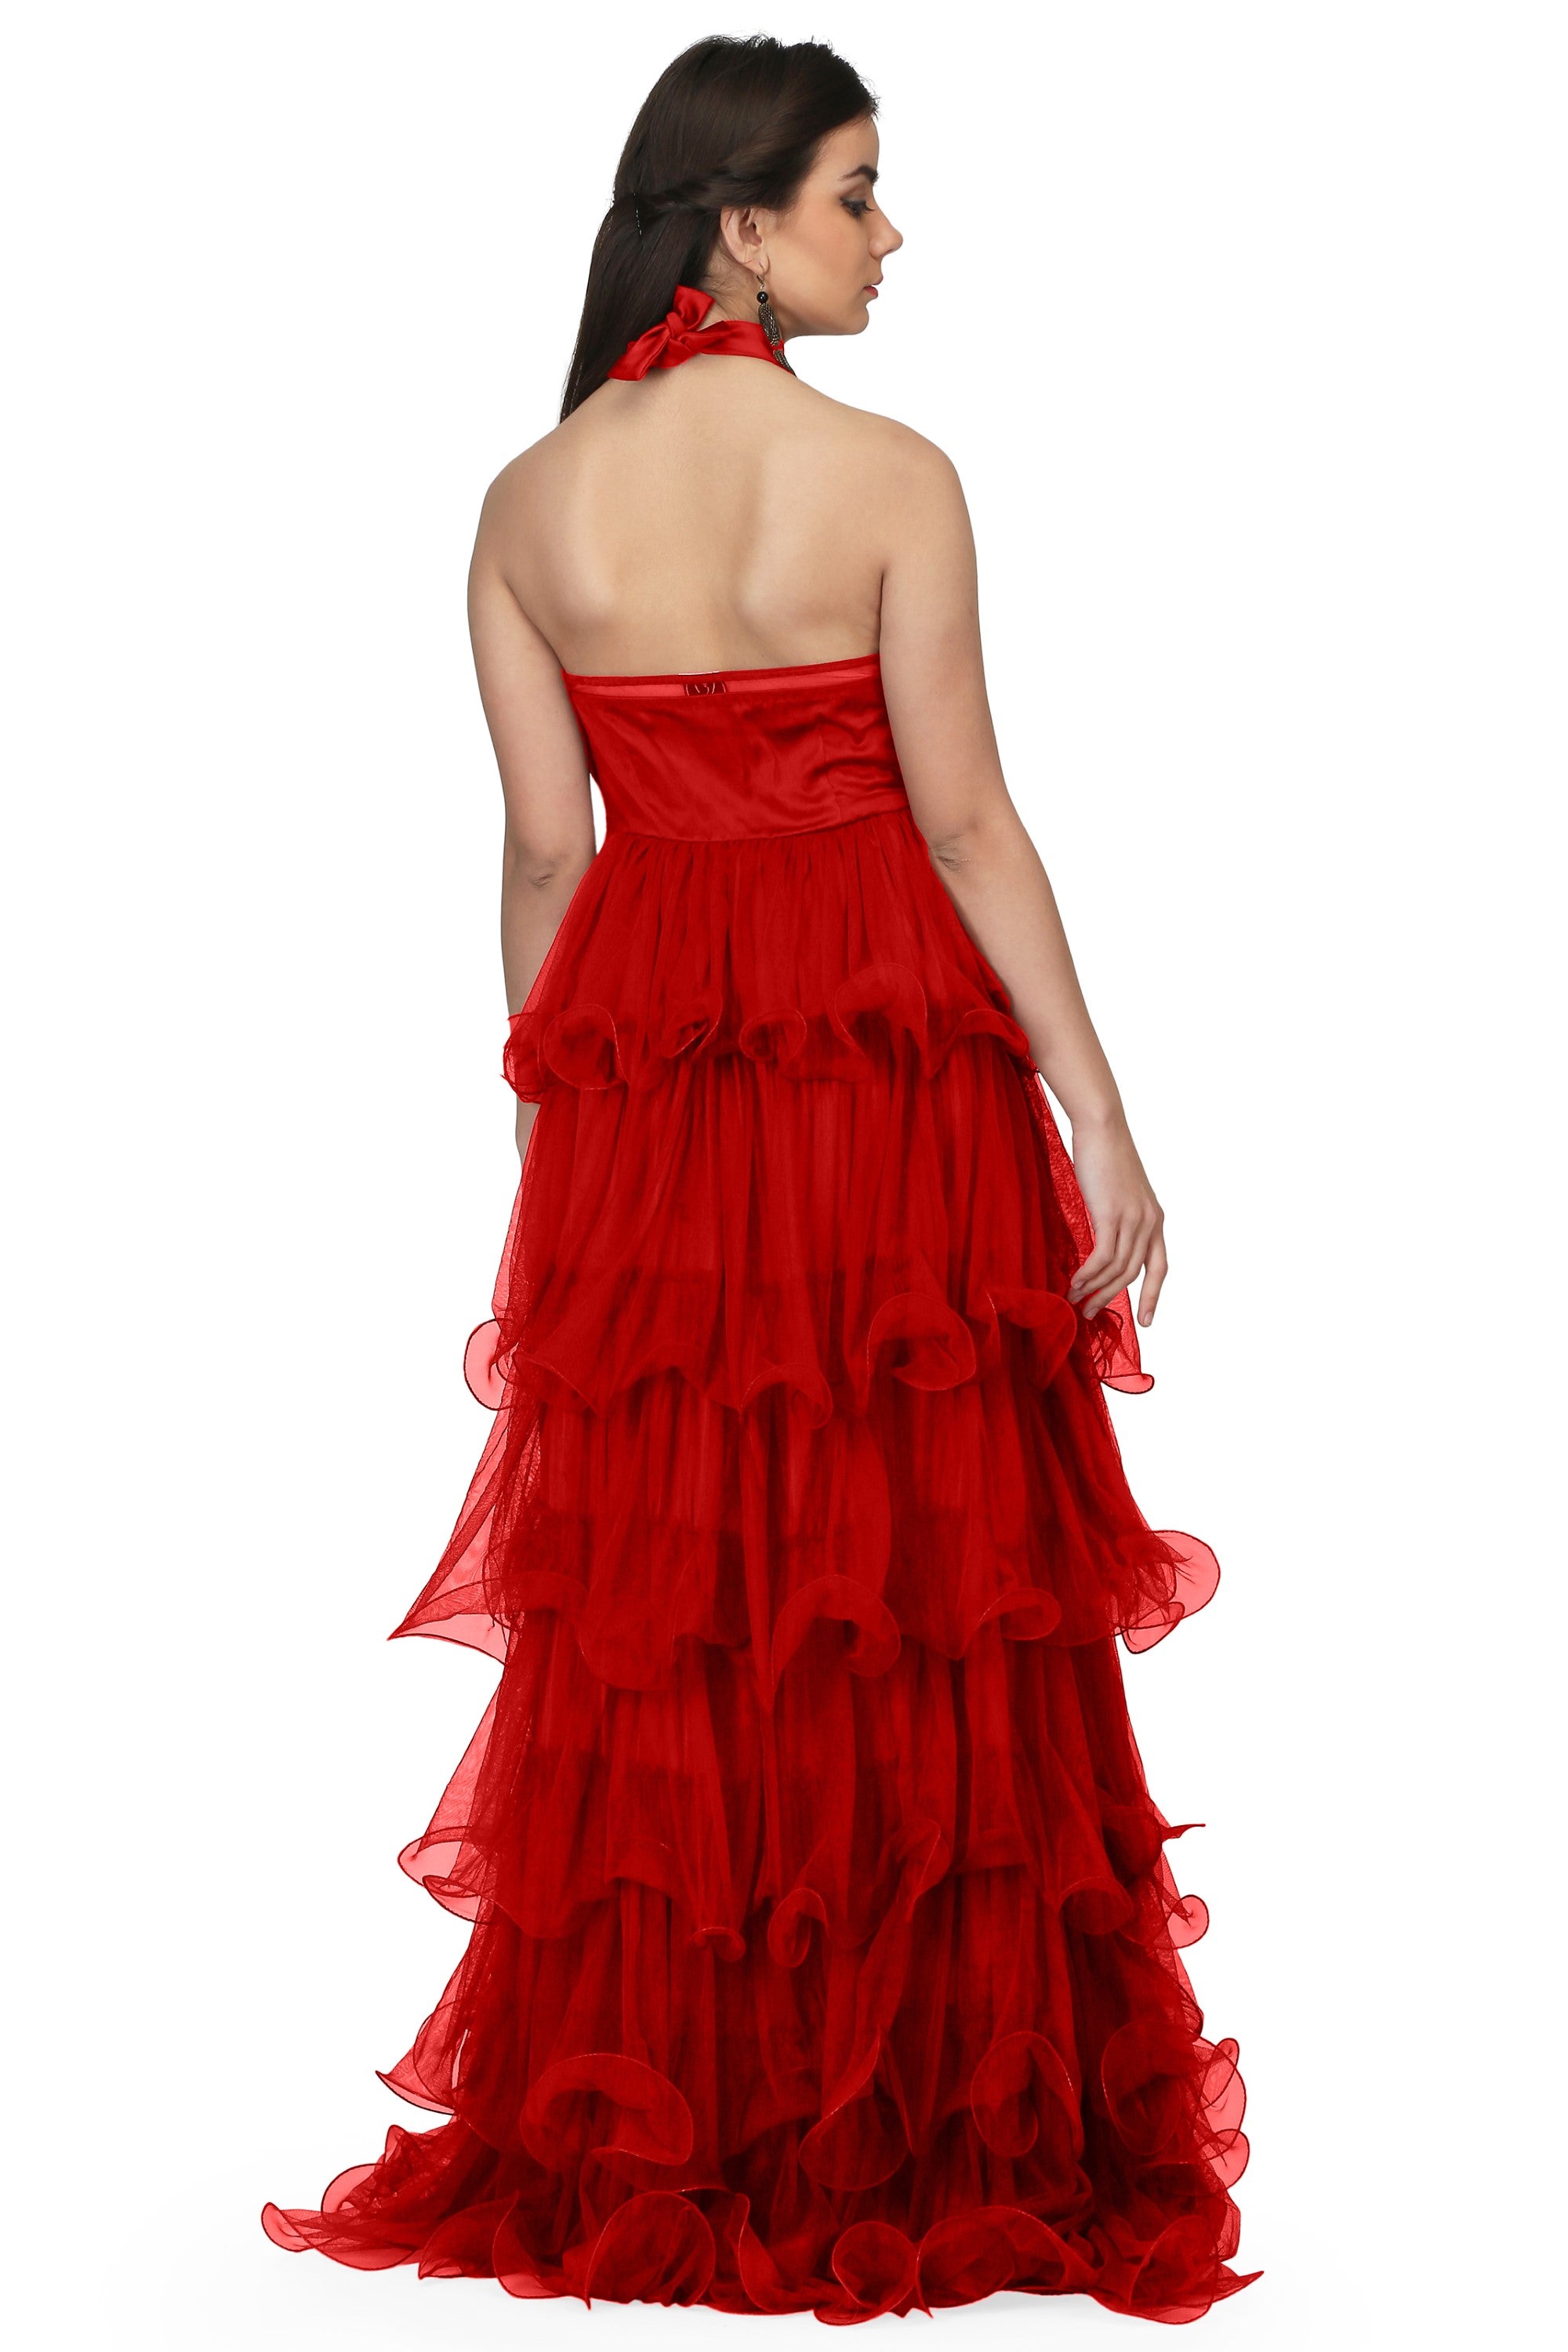 Women's Halter Neck Drape Net  Corset Gown In Red - MIRACOLOS by Ruchi